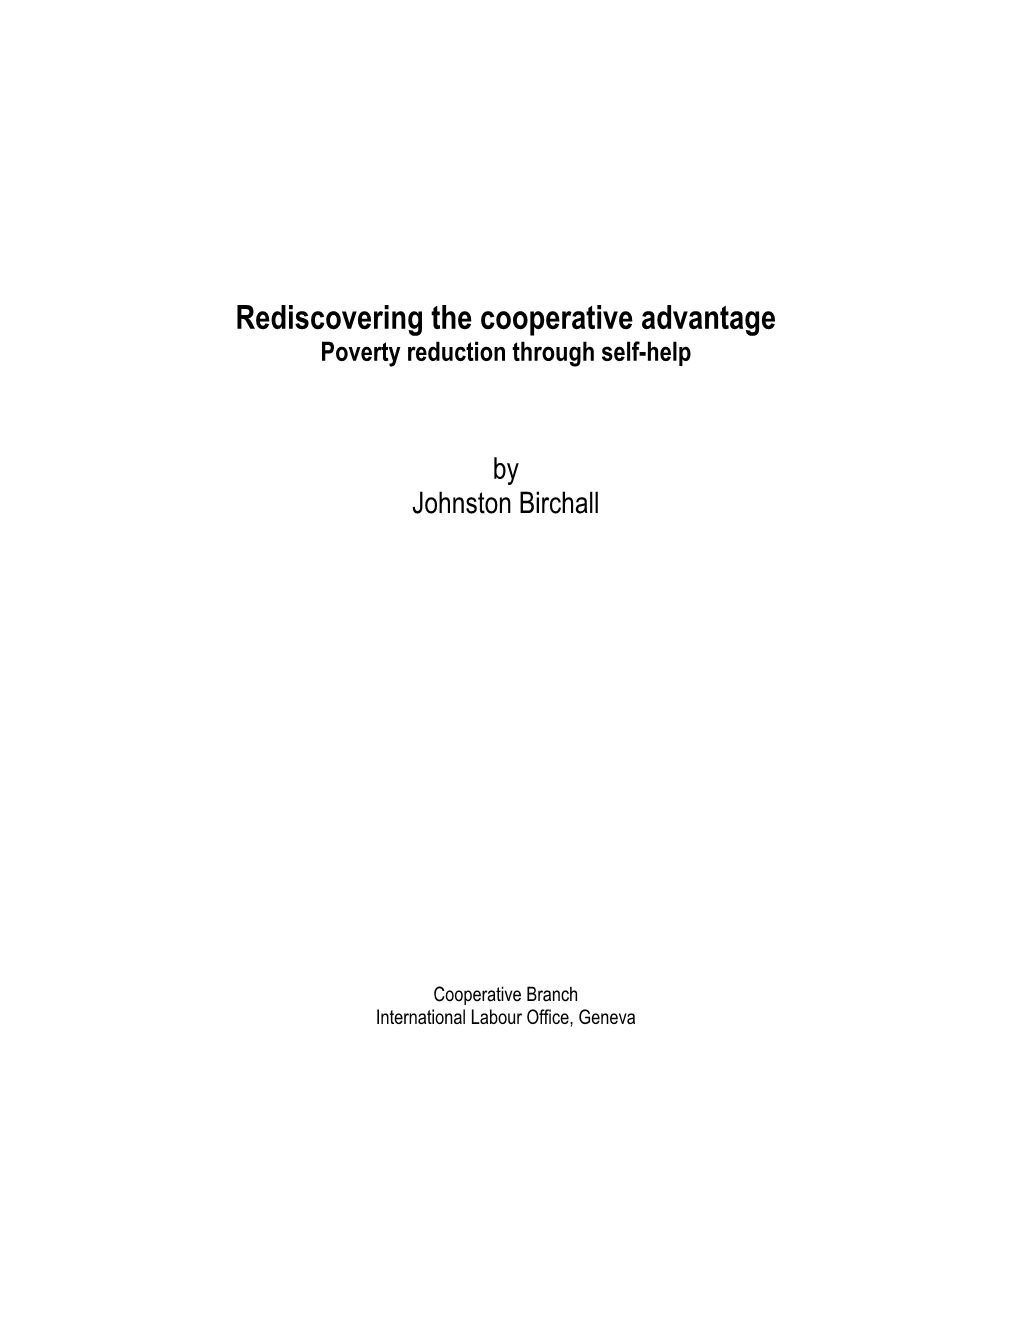 Rediscovering the Cooperative Advantage Poverty Reduction Through Self-Help